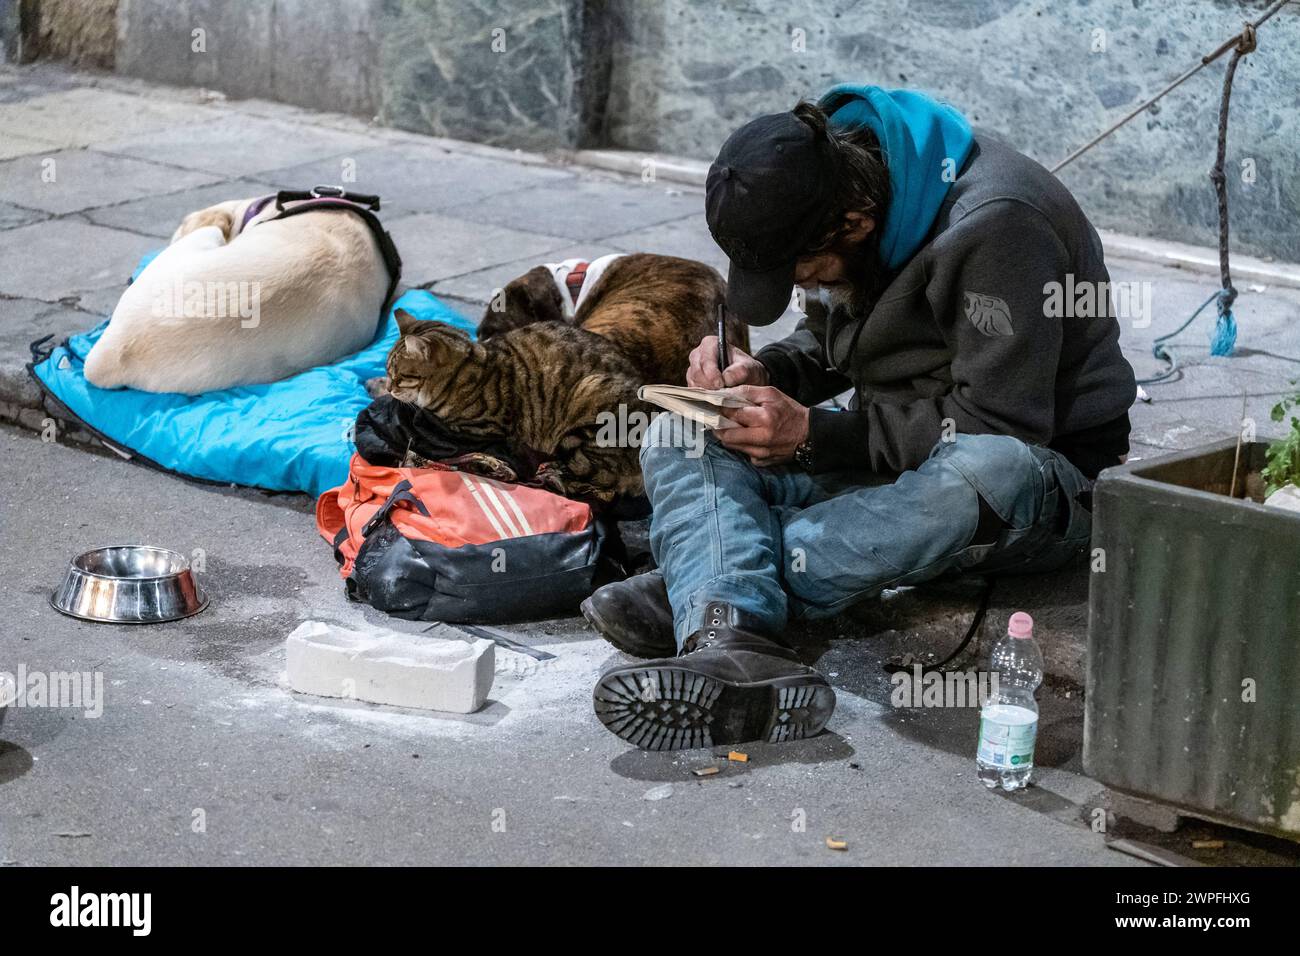 Catania, Italy - March 2, 2024: Homeless man on the street with his animals, dogs and cat in the city of Catania in Italy *** Obdachloser am auf der Straße mit seinen Tieren, Hunde und Katze in der Stadt Catania in Italien Stock Photo